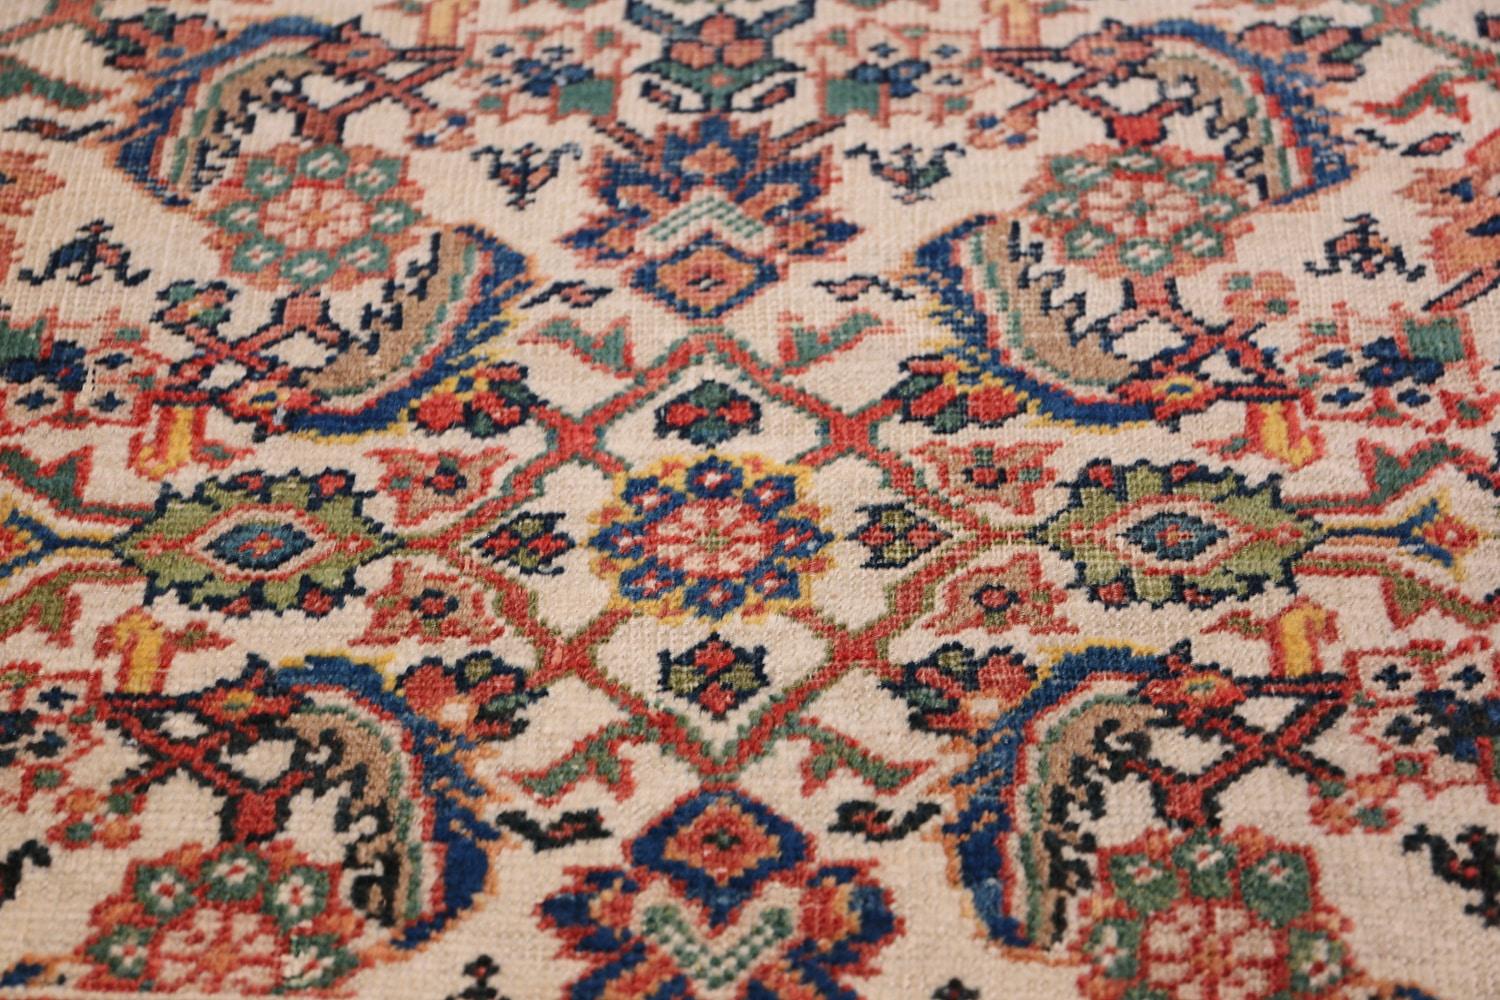 Antique Persian Sultanabad Carpet. Size: 8 ft x 10 ft 7 in (2.44 m x 3.23 m) 1